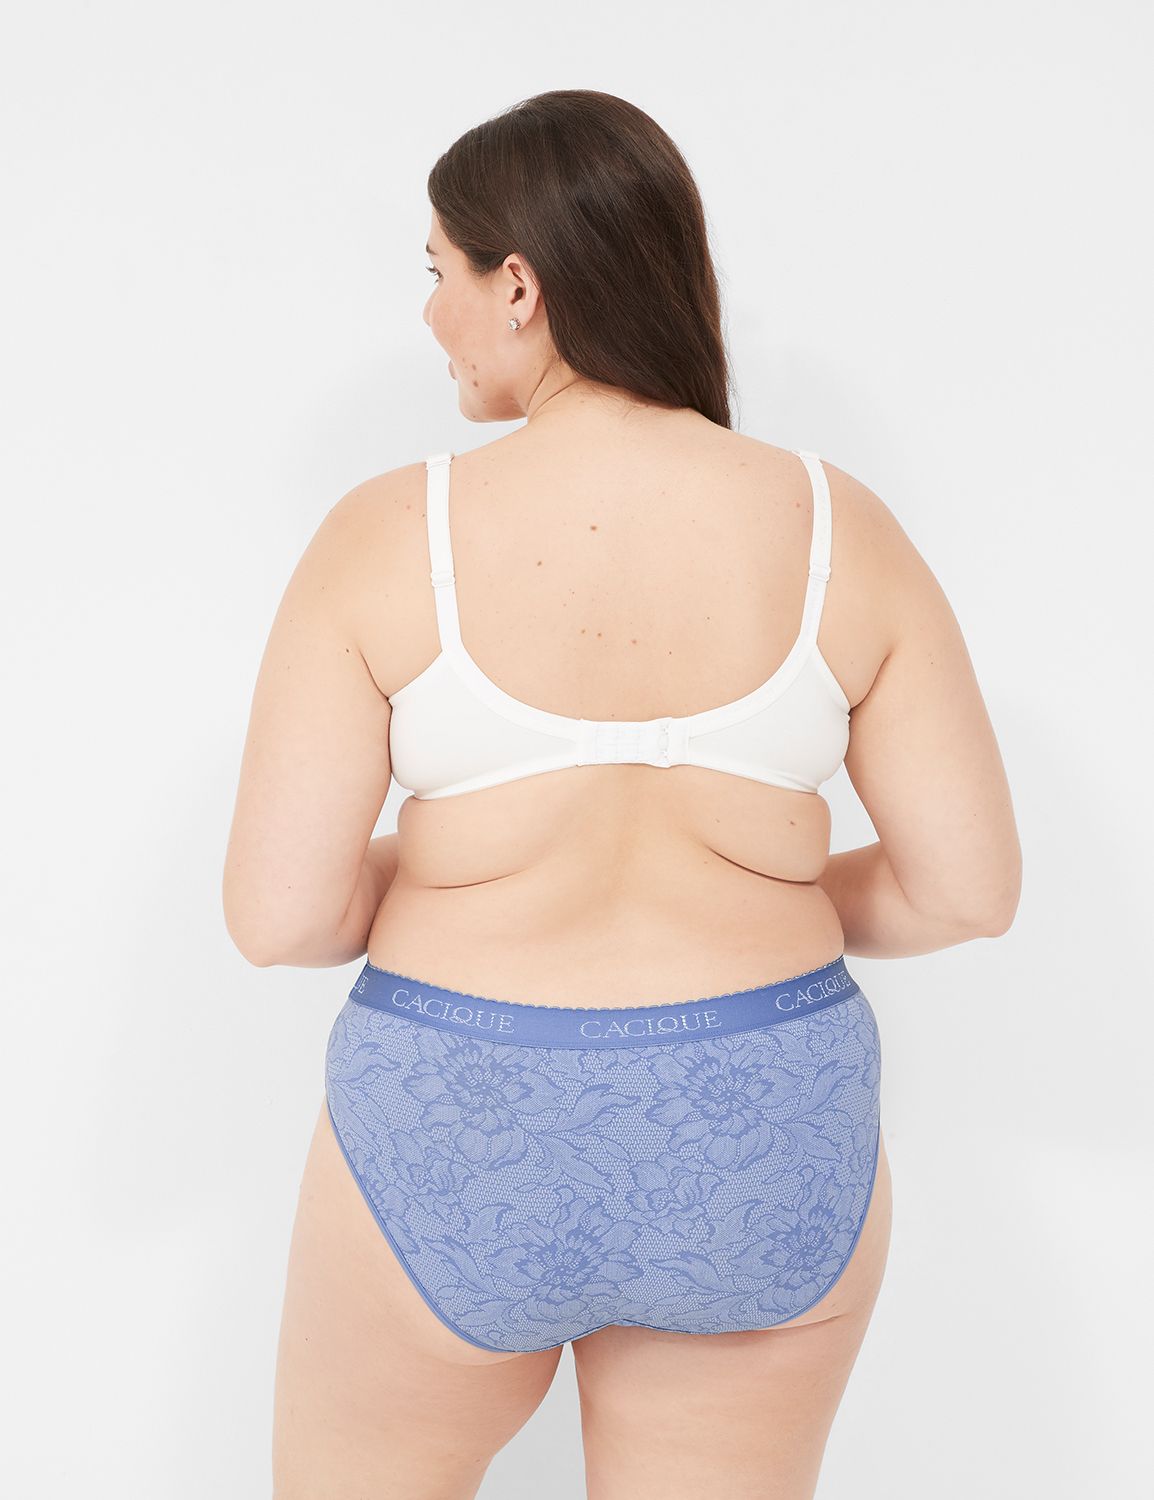 Lane Bryant - Tick Tock! Shop online through midnight tonight for BOGO free  Cacique bras - now in 86 sizes. Bands 32-50. Cups A-K. Shop now: http:// lanebryant.us/QaNTyB